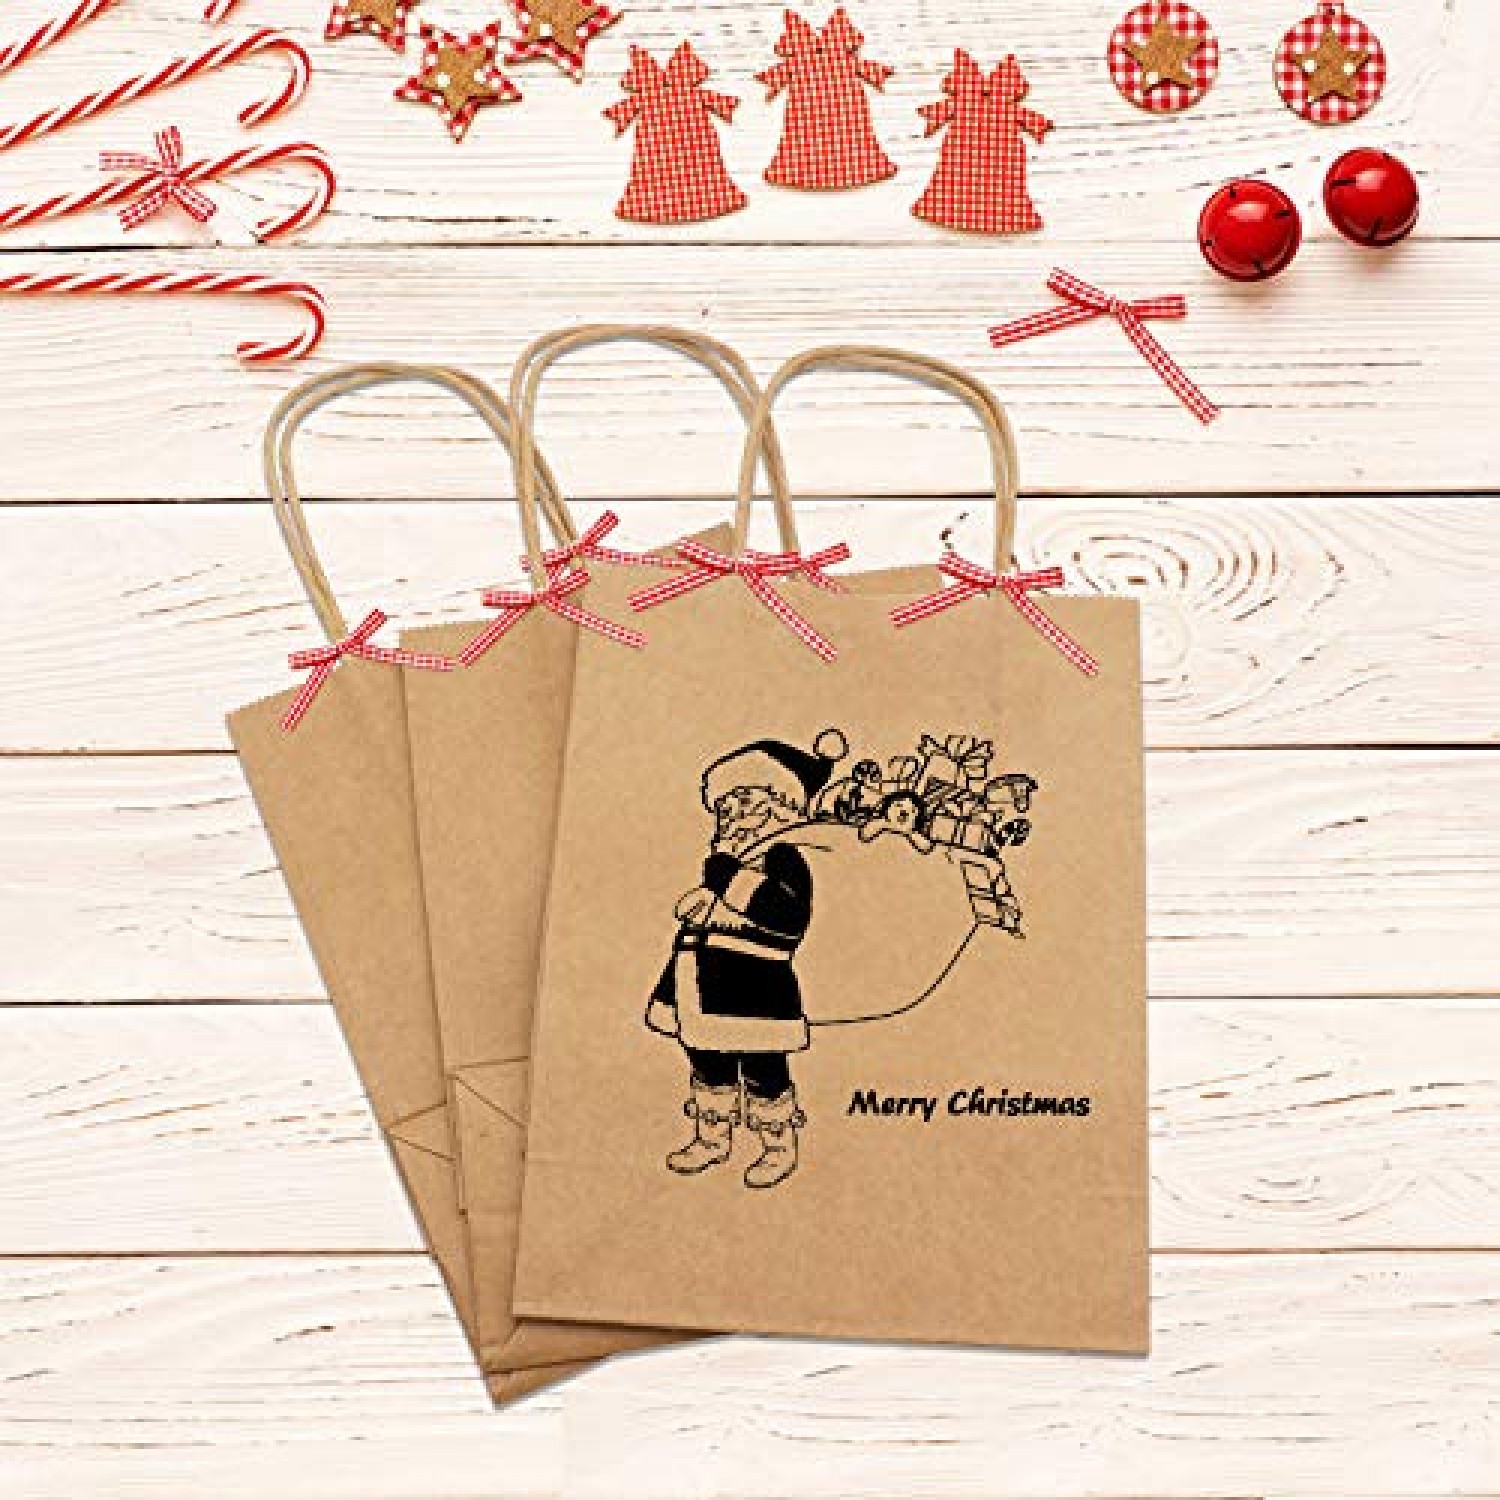 Party Bags,Brown Paper Bags with Handles Bulk 25pcs Brown Kraft Paper Bags，Eusoar 8.3x 4.3x 10.6 Gift Bags，Shopping Bags,Standable Retail Merchandise Bags 